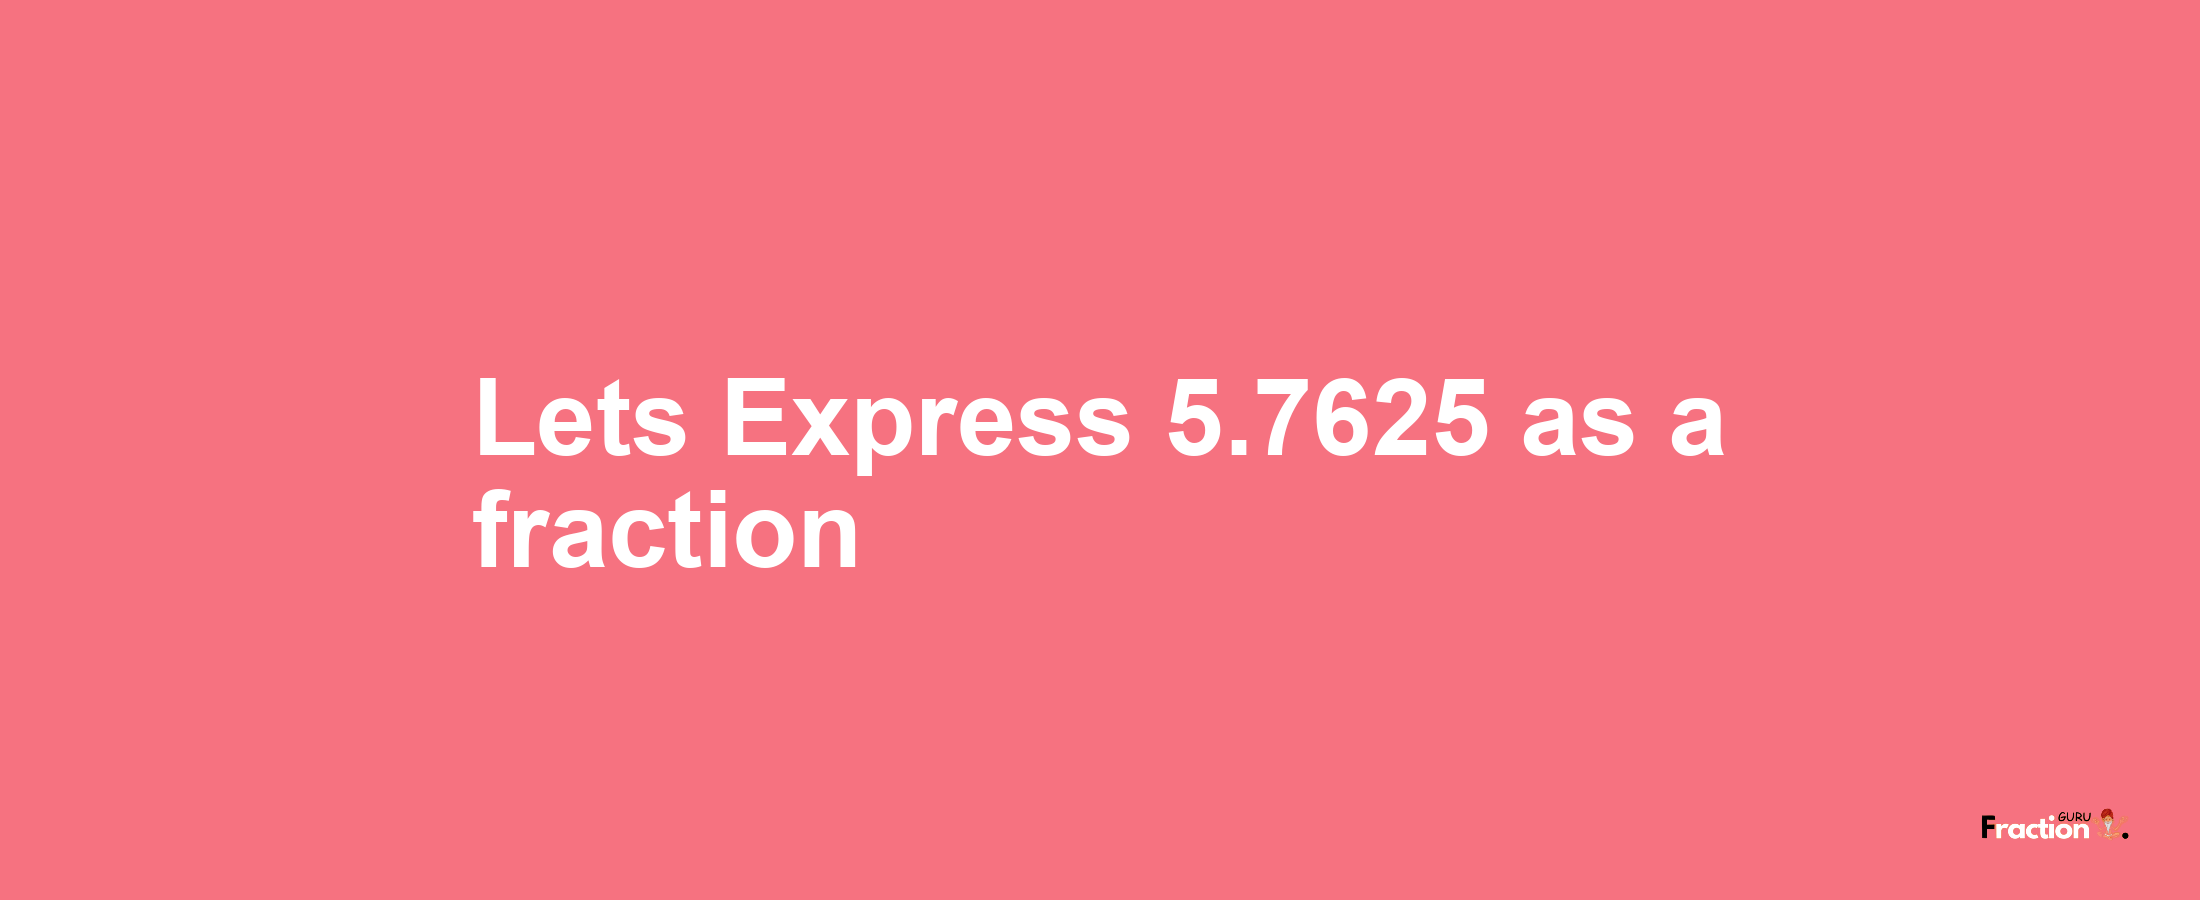 Lets Express 5.7625 as afraction